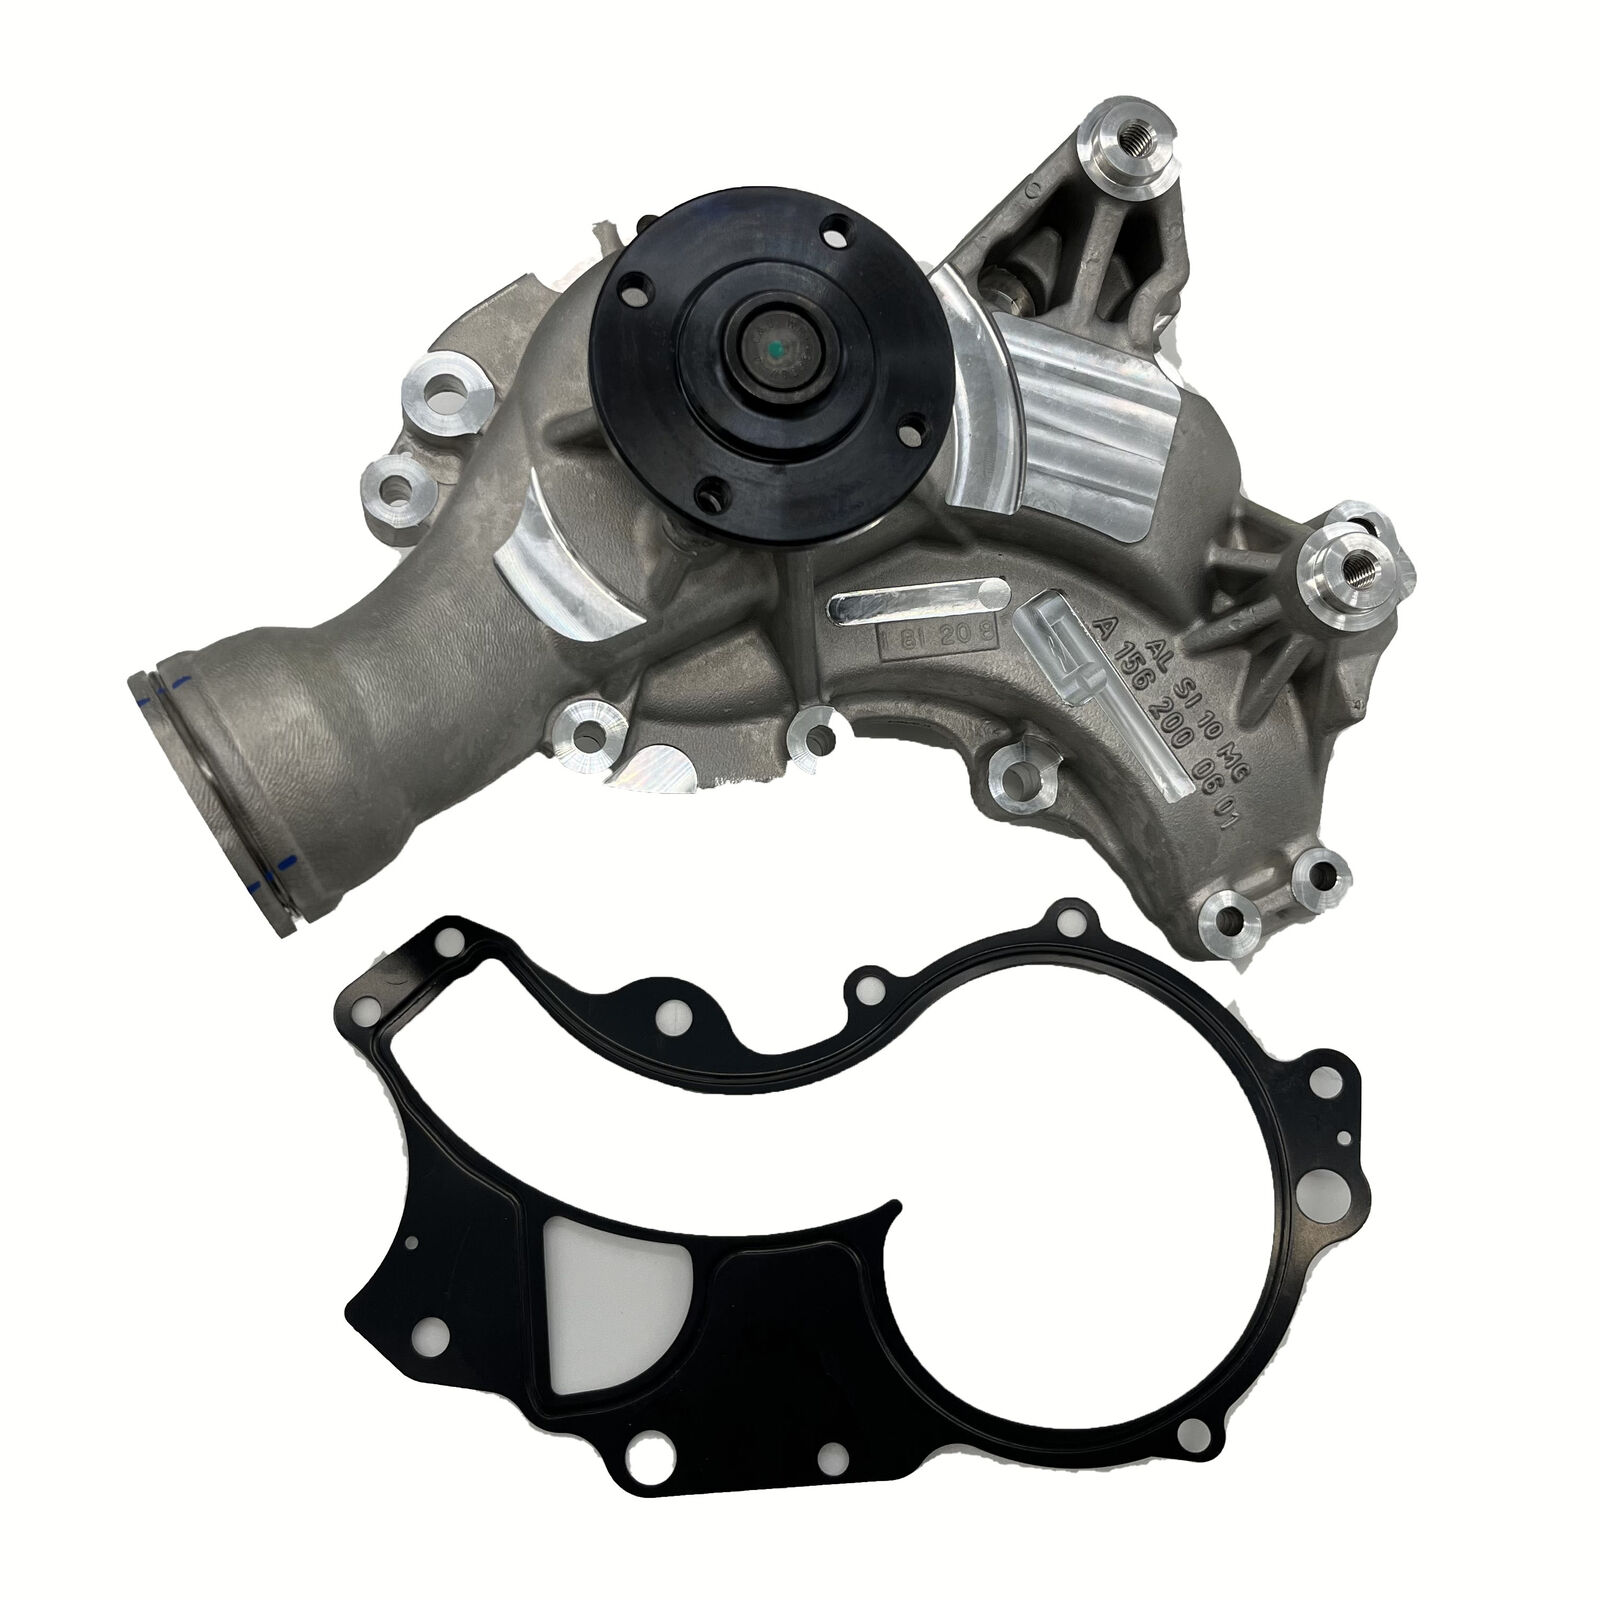 NEW For Mercedes Benz ML63 AMG 2008-2011 Water Coolant Pump 1562000601 USA